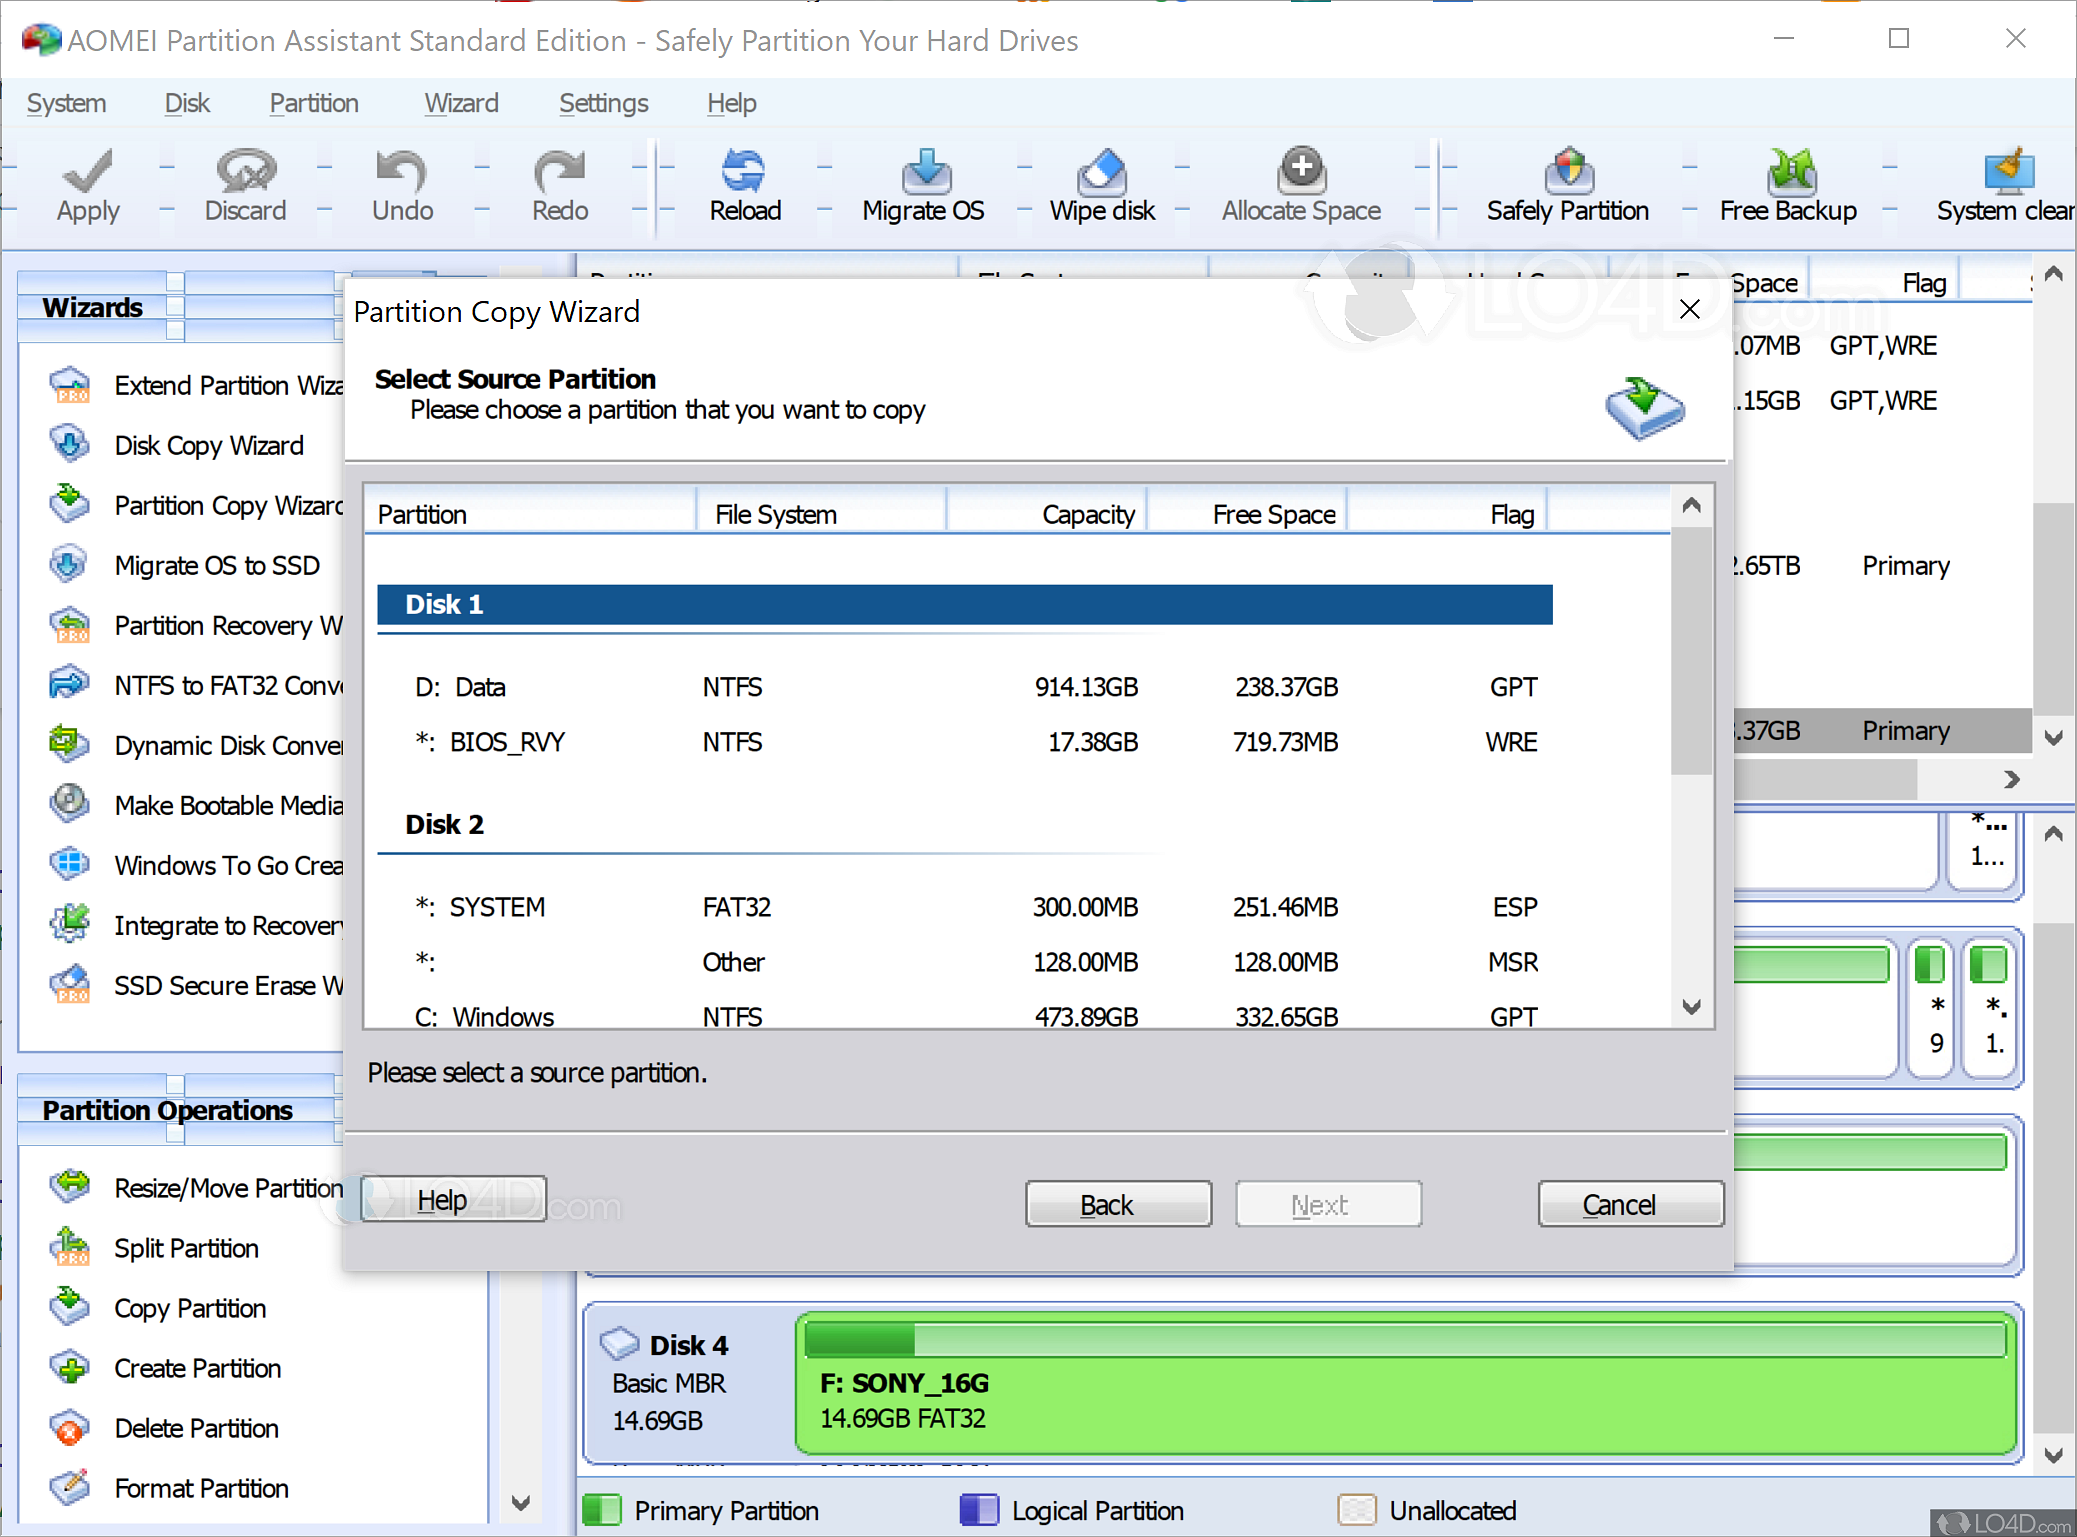 download the last version for android AOMEI Partition Assistant Pro 10.2.1